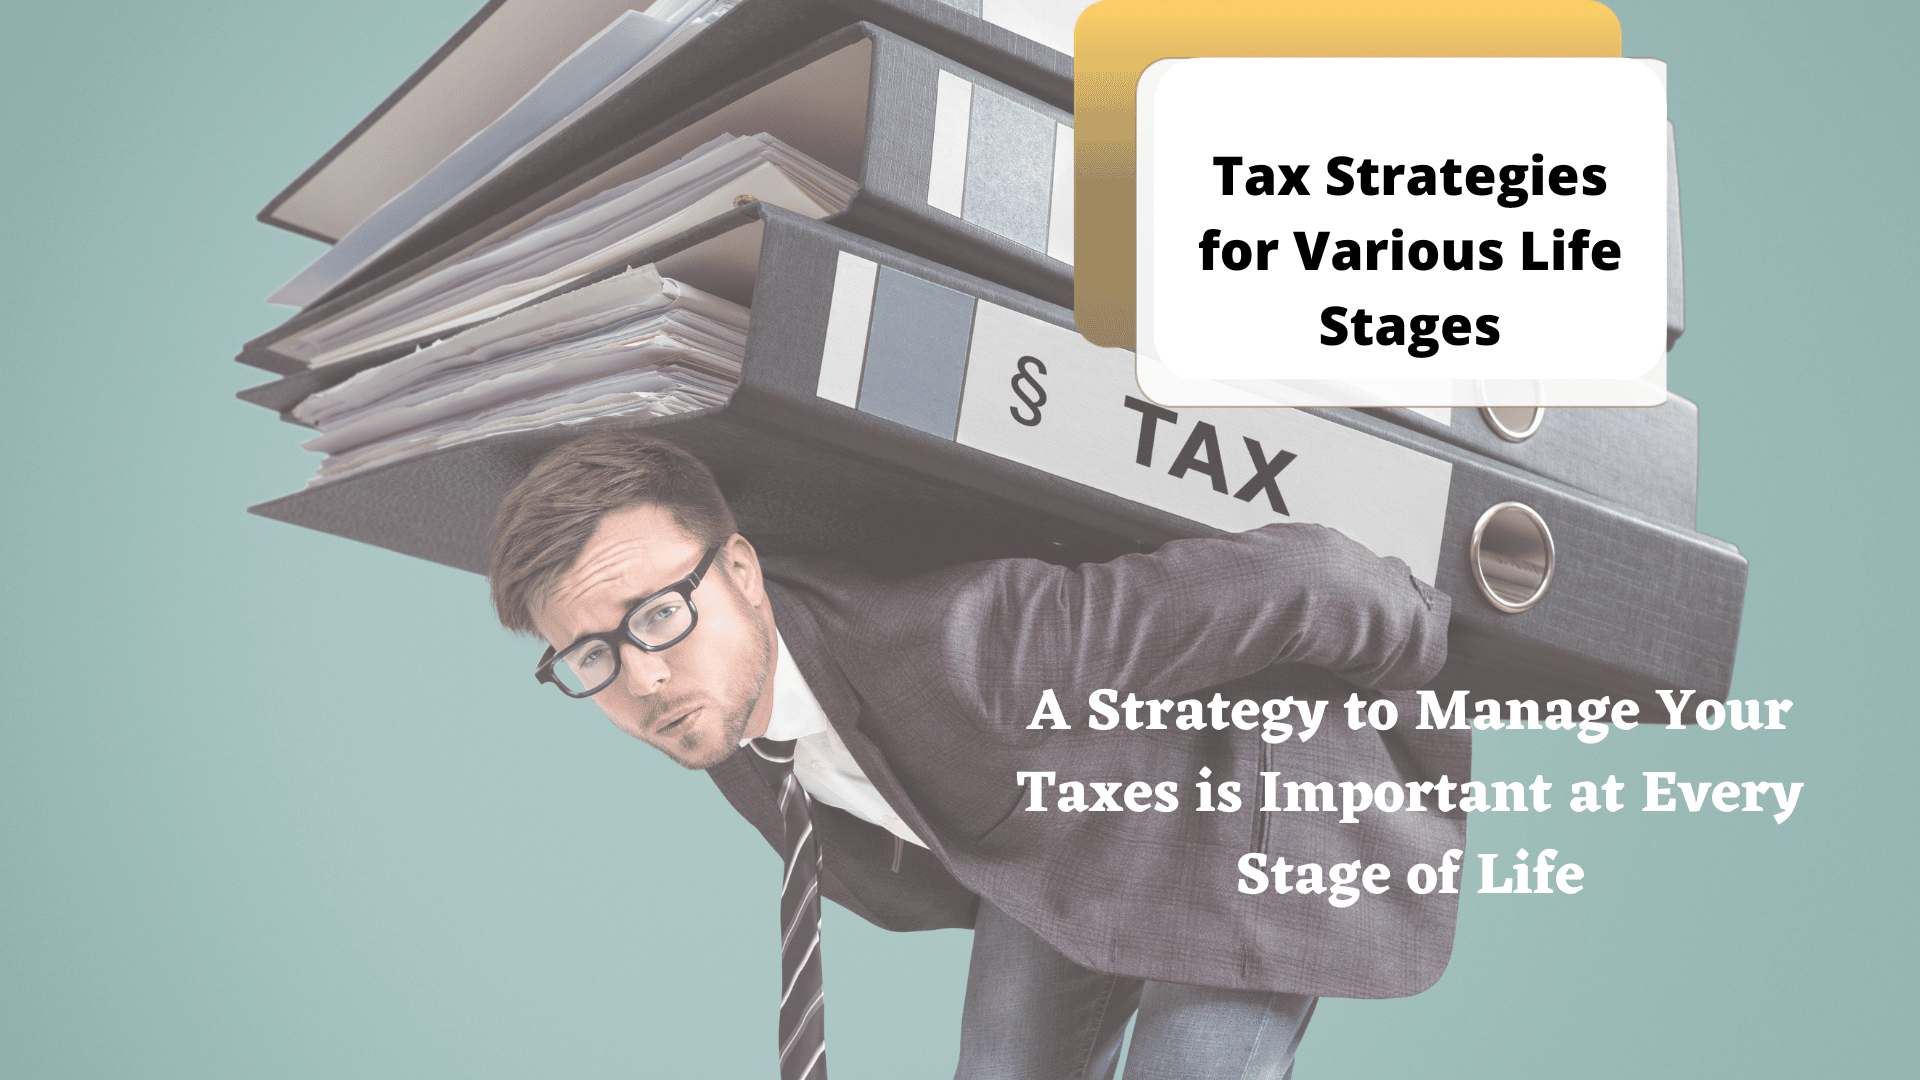 Tax Strategies for Various Stages of Life